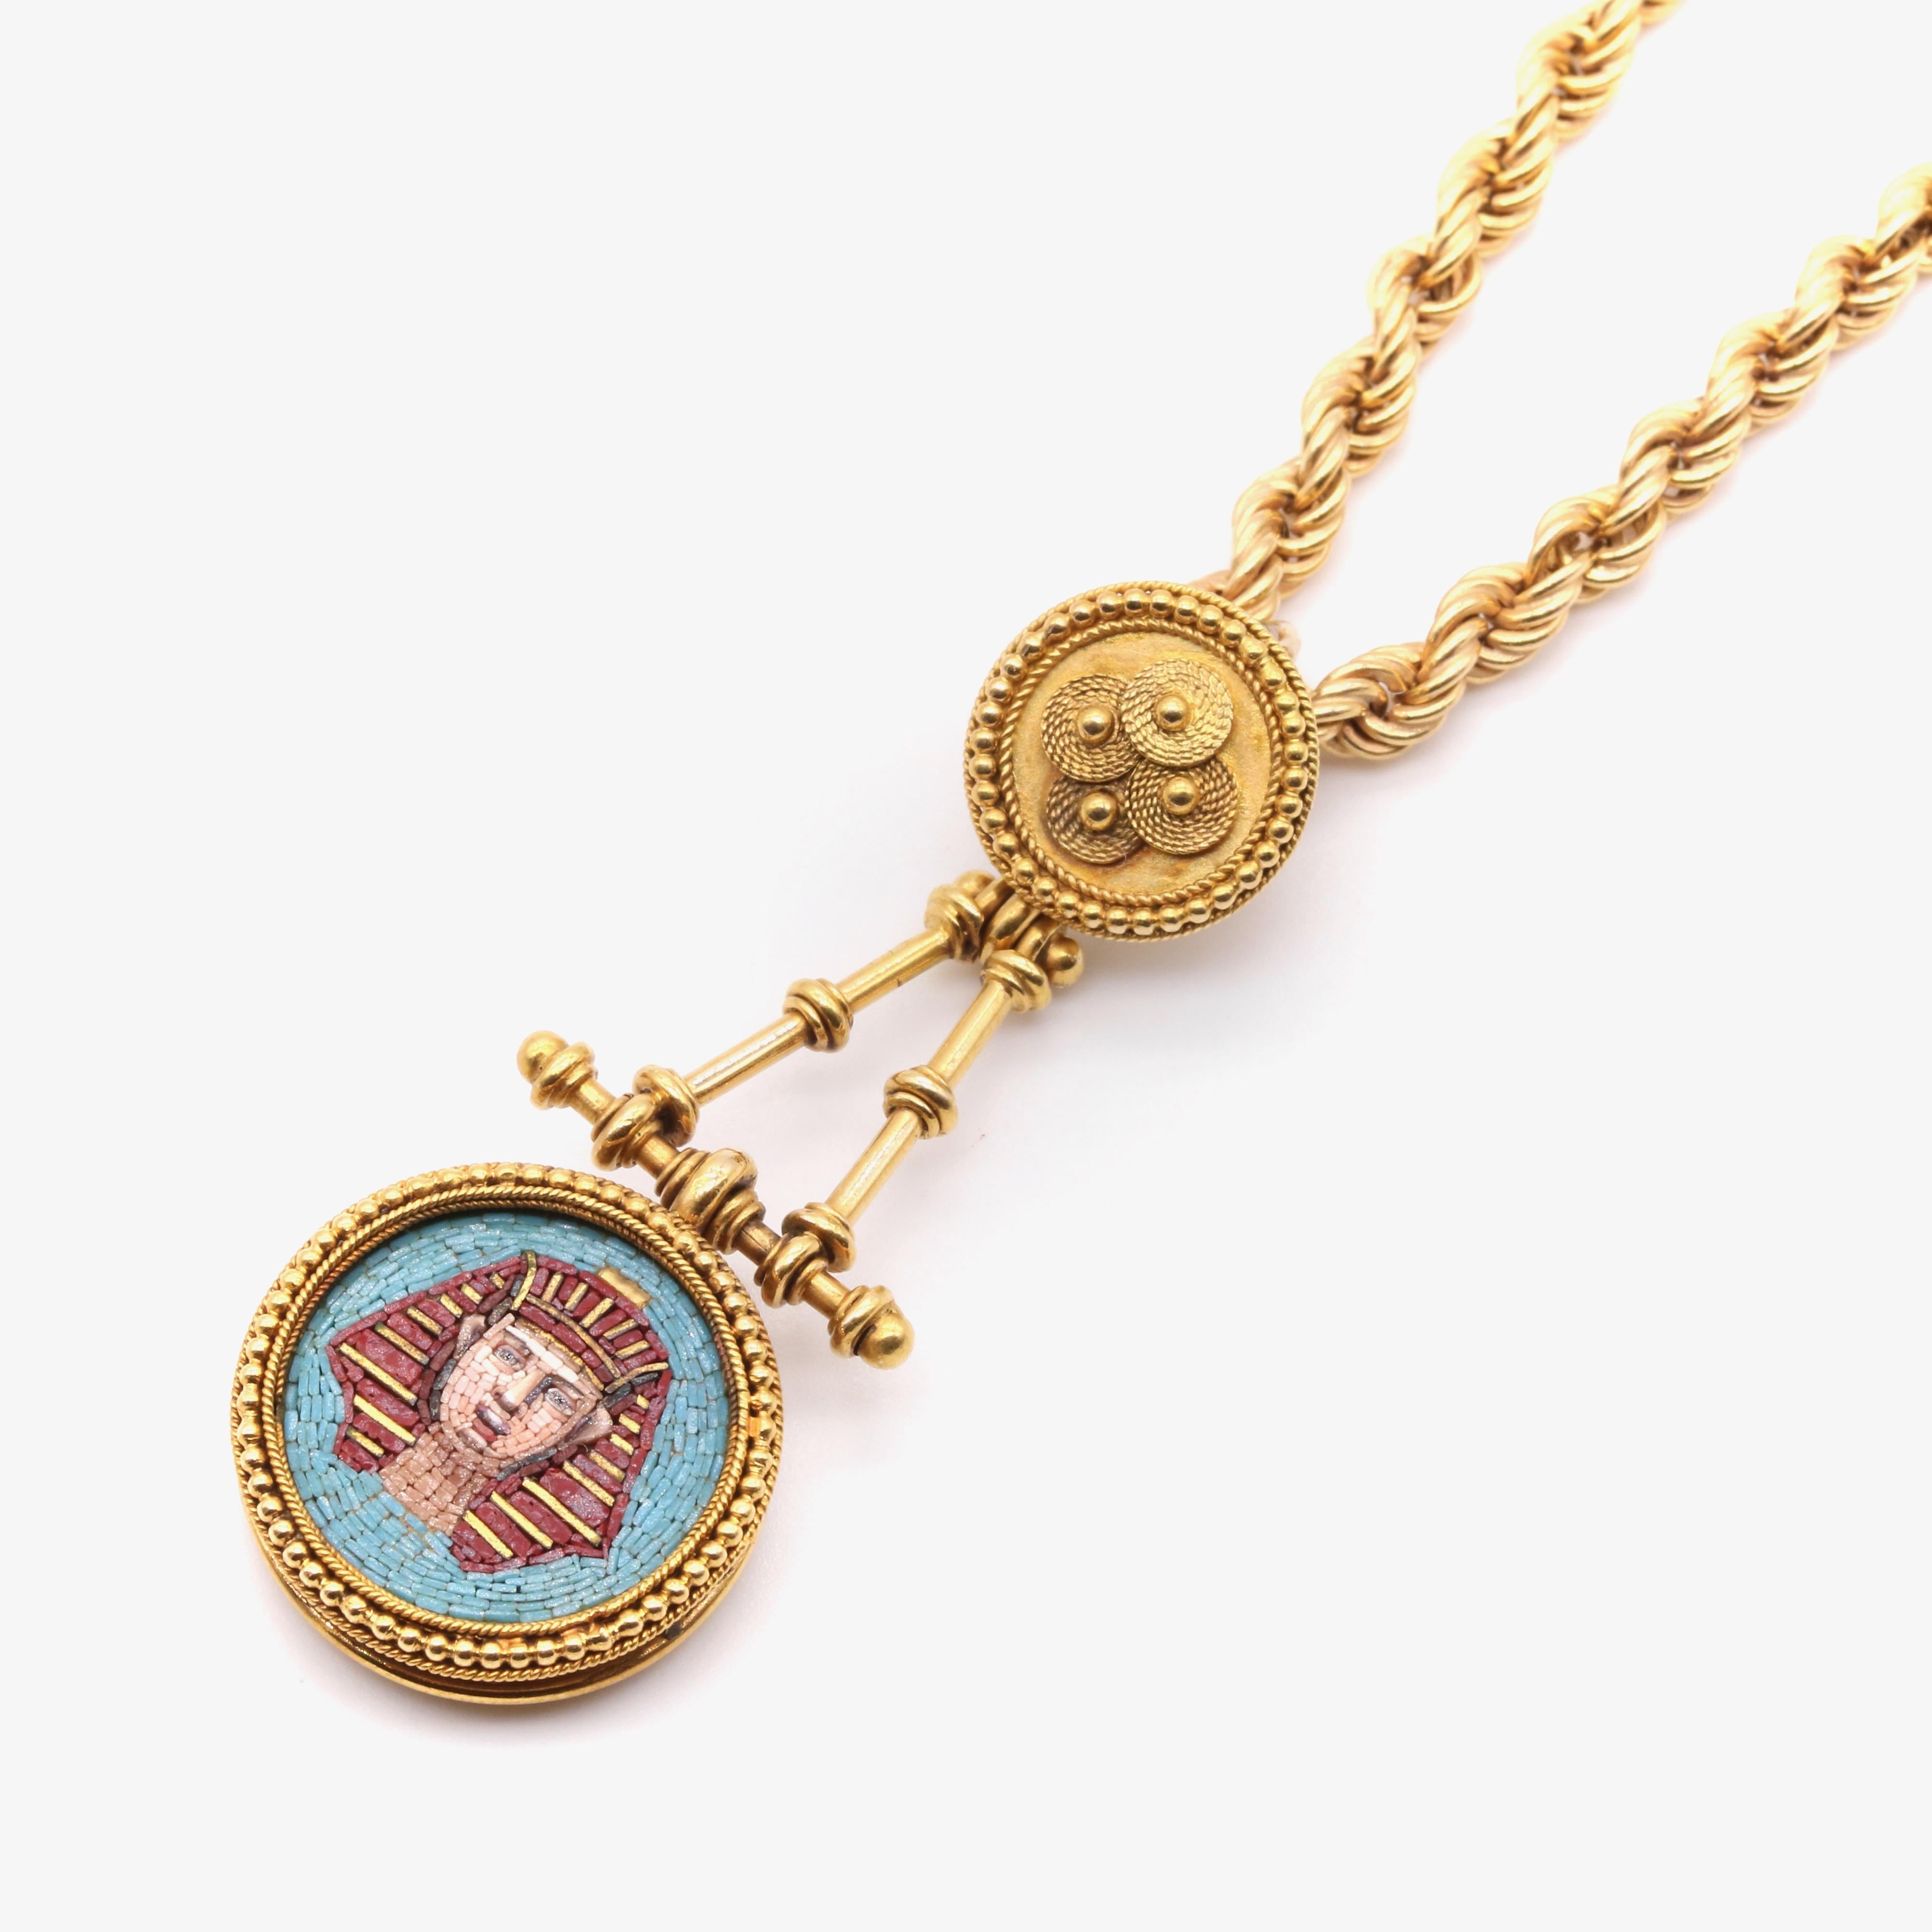 Antique Victorian 1870s 18K Gold Egyptian Revival Pharaoh Micro Mosaic Pendant For Sale 7